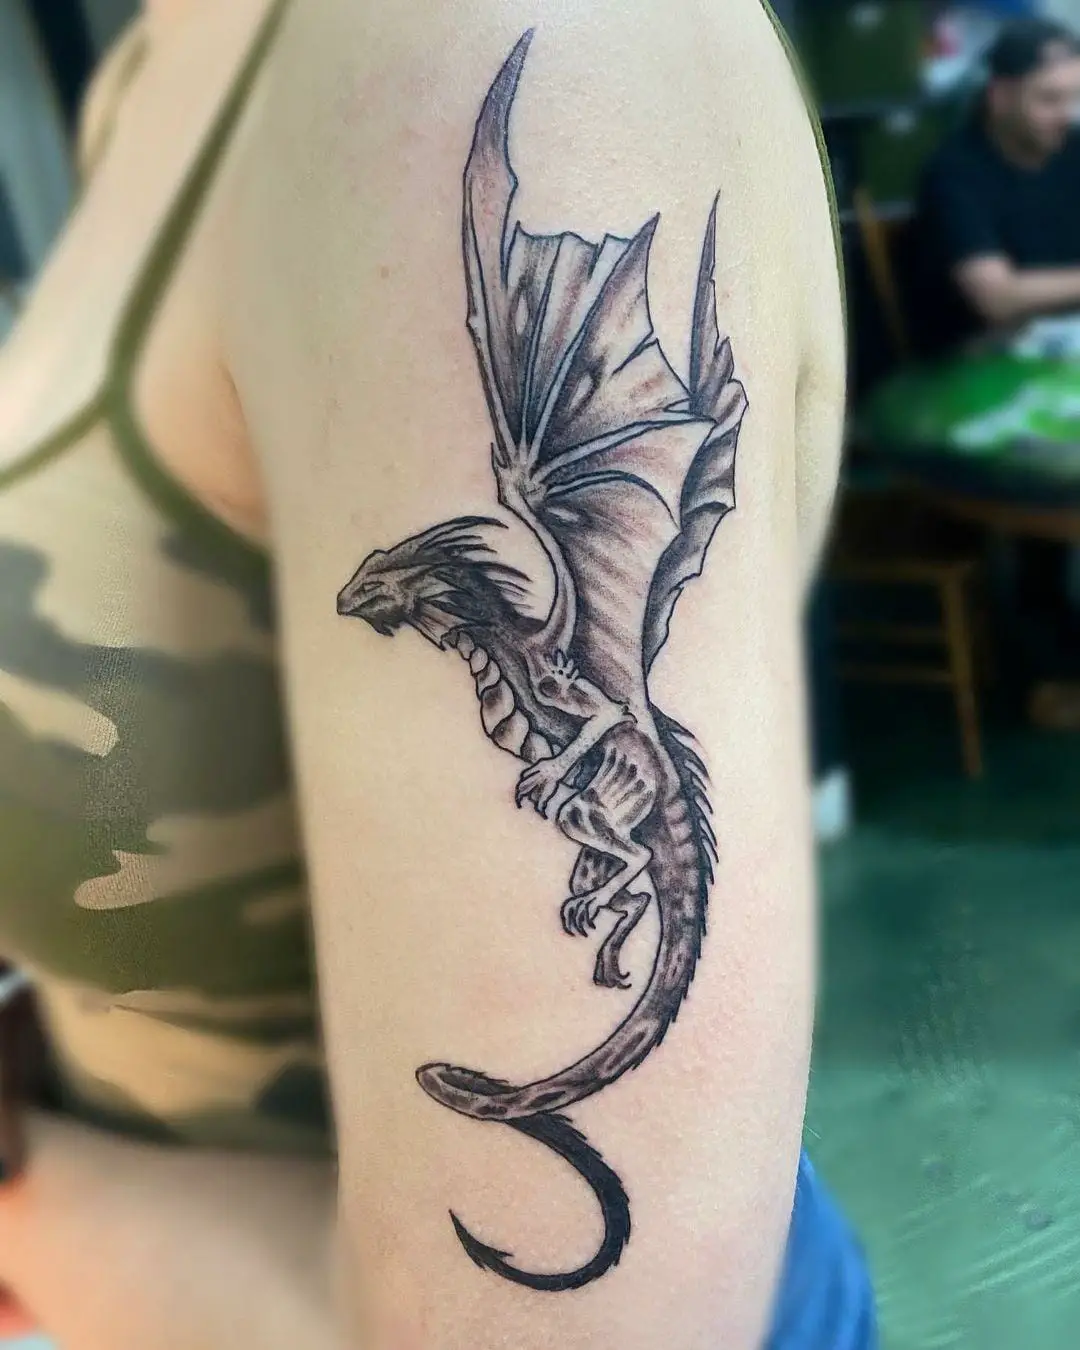 69 Stunning Dragon Tattoos For Arms To Try Right Now - Psycho Tats